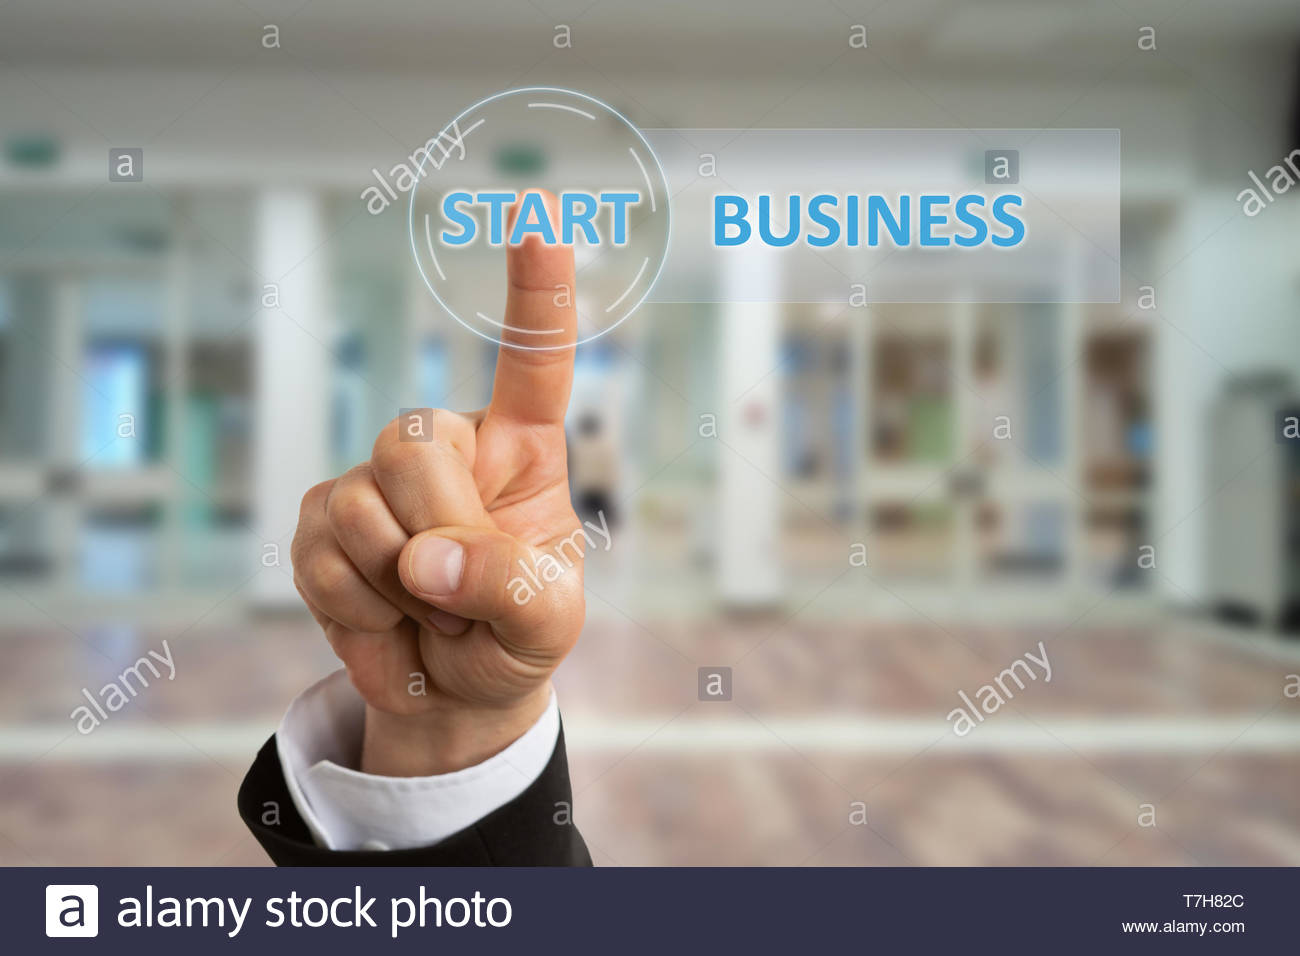 Businessman Wearing Suit Touching Start Business Button With Index